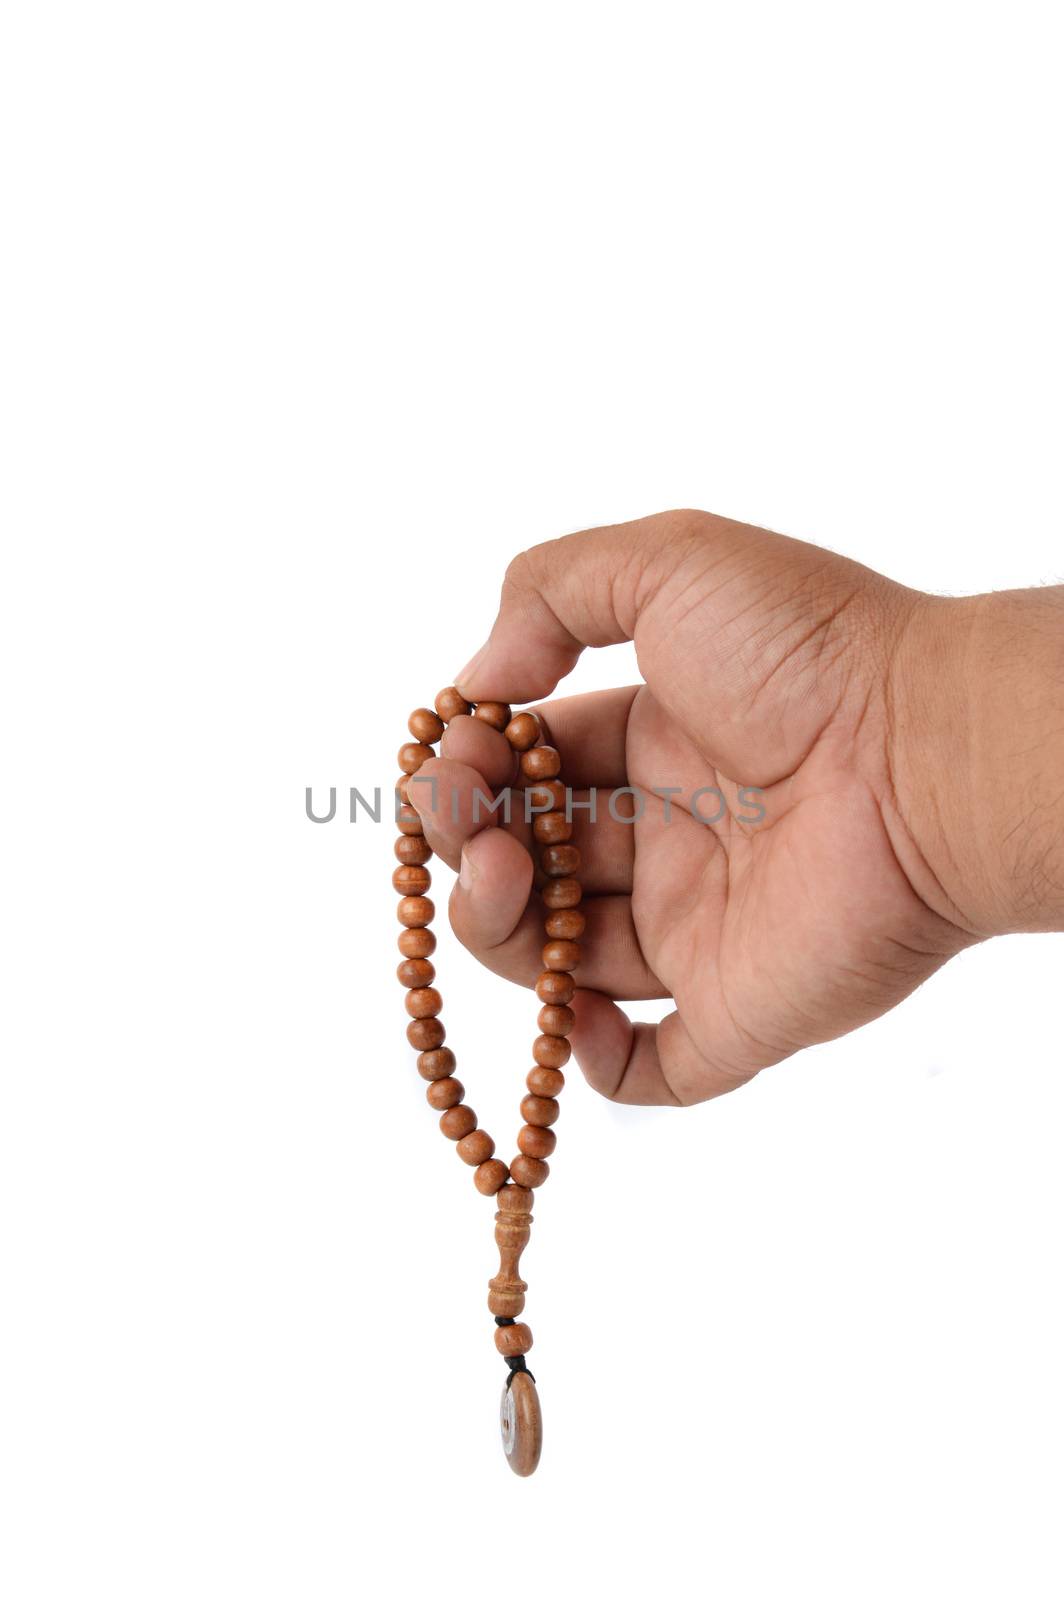 Muslim male hands holding rosary by antonihalim